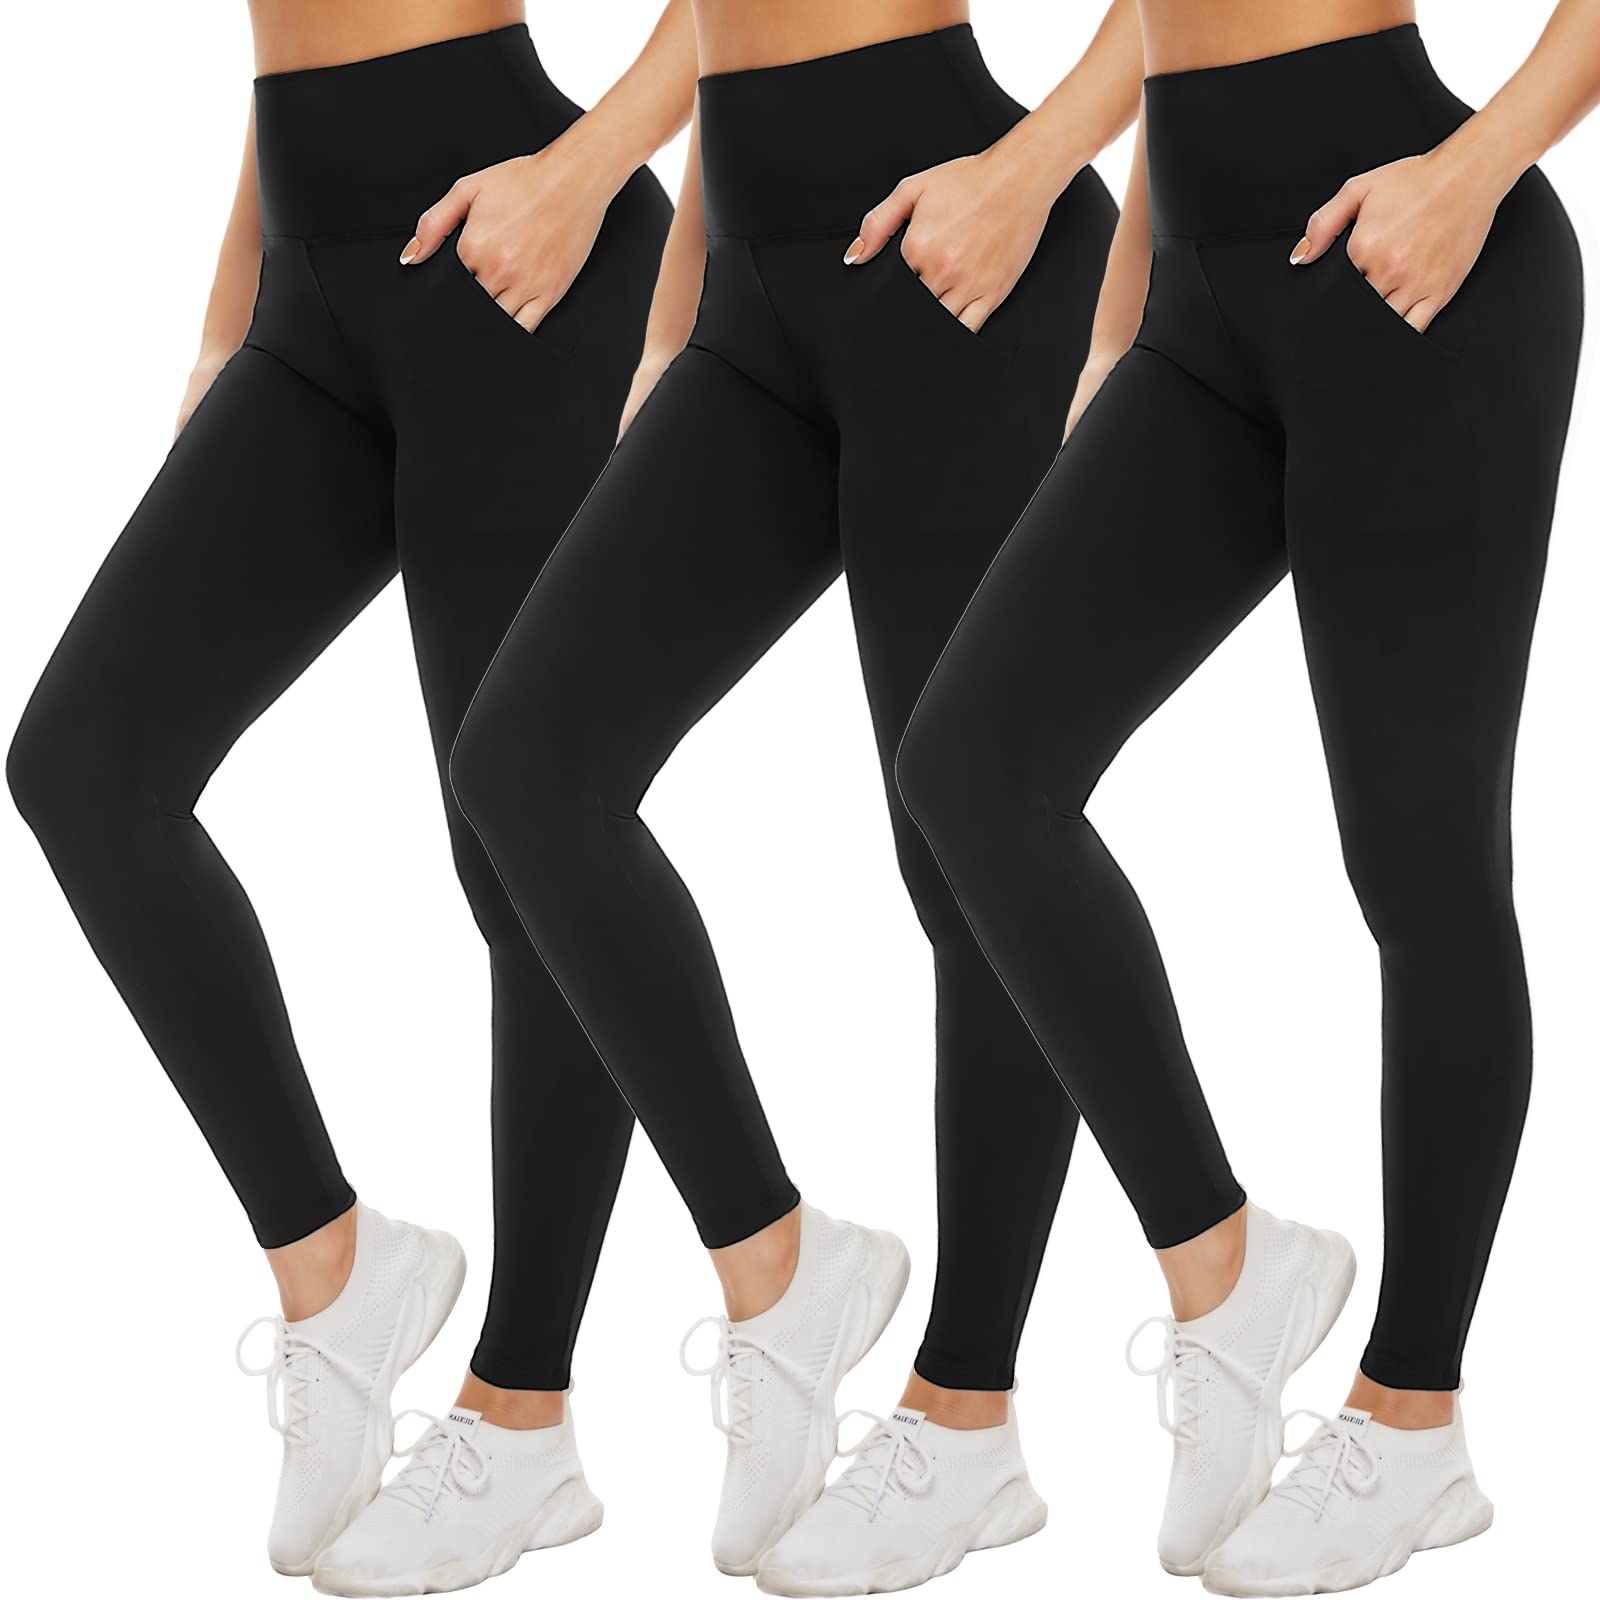 NEW YOUNG 3 Pack Leggings with Pockets for Women High Waisted Tummy Control Workout  Yoga Pants 3 Pack Black/Black/Black Large-X-Large